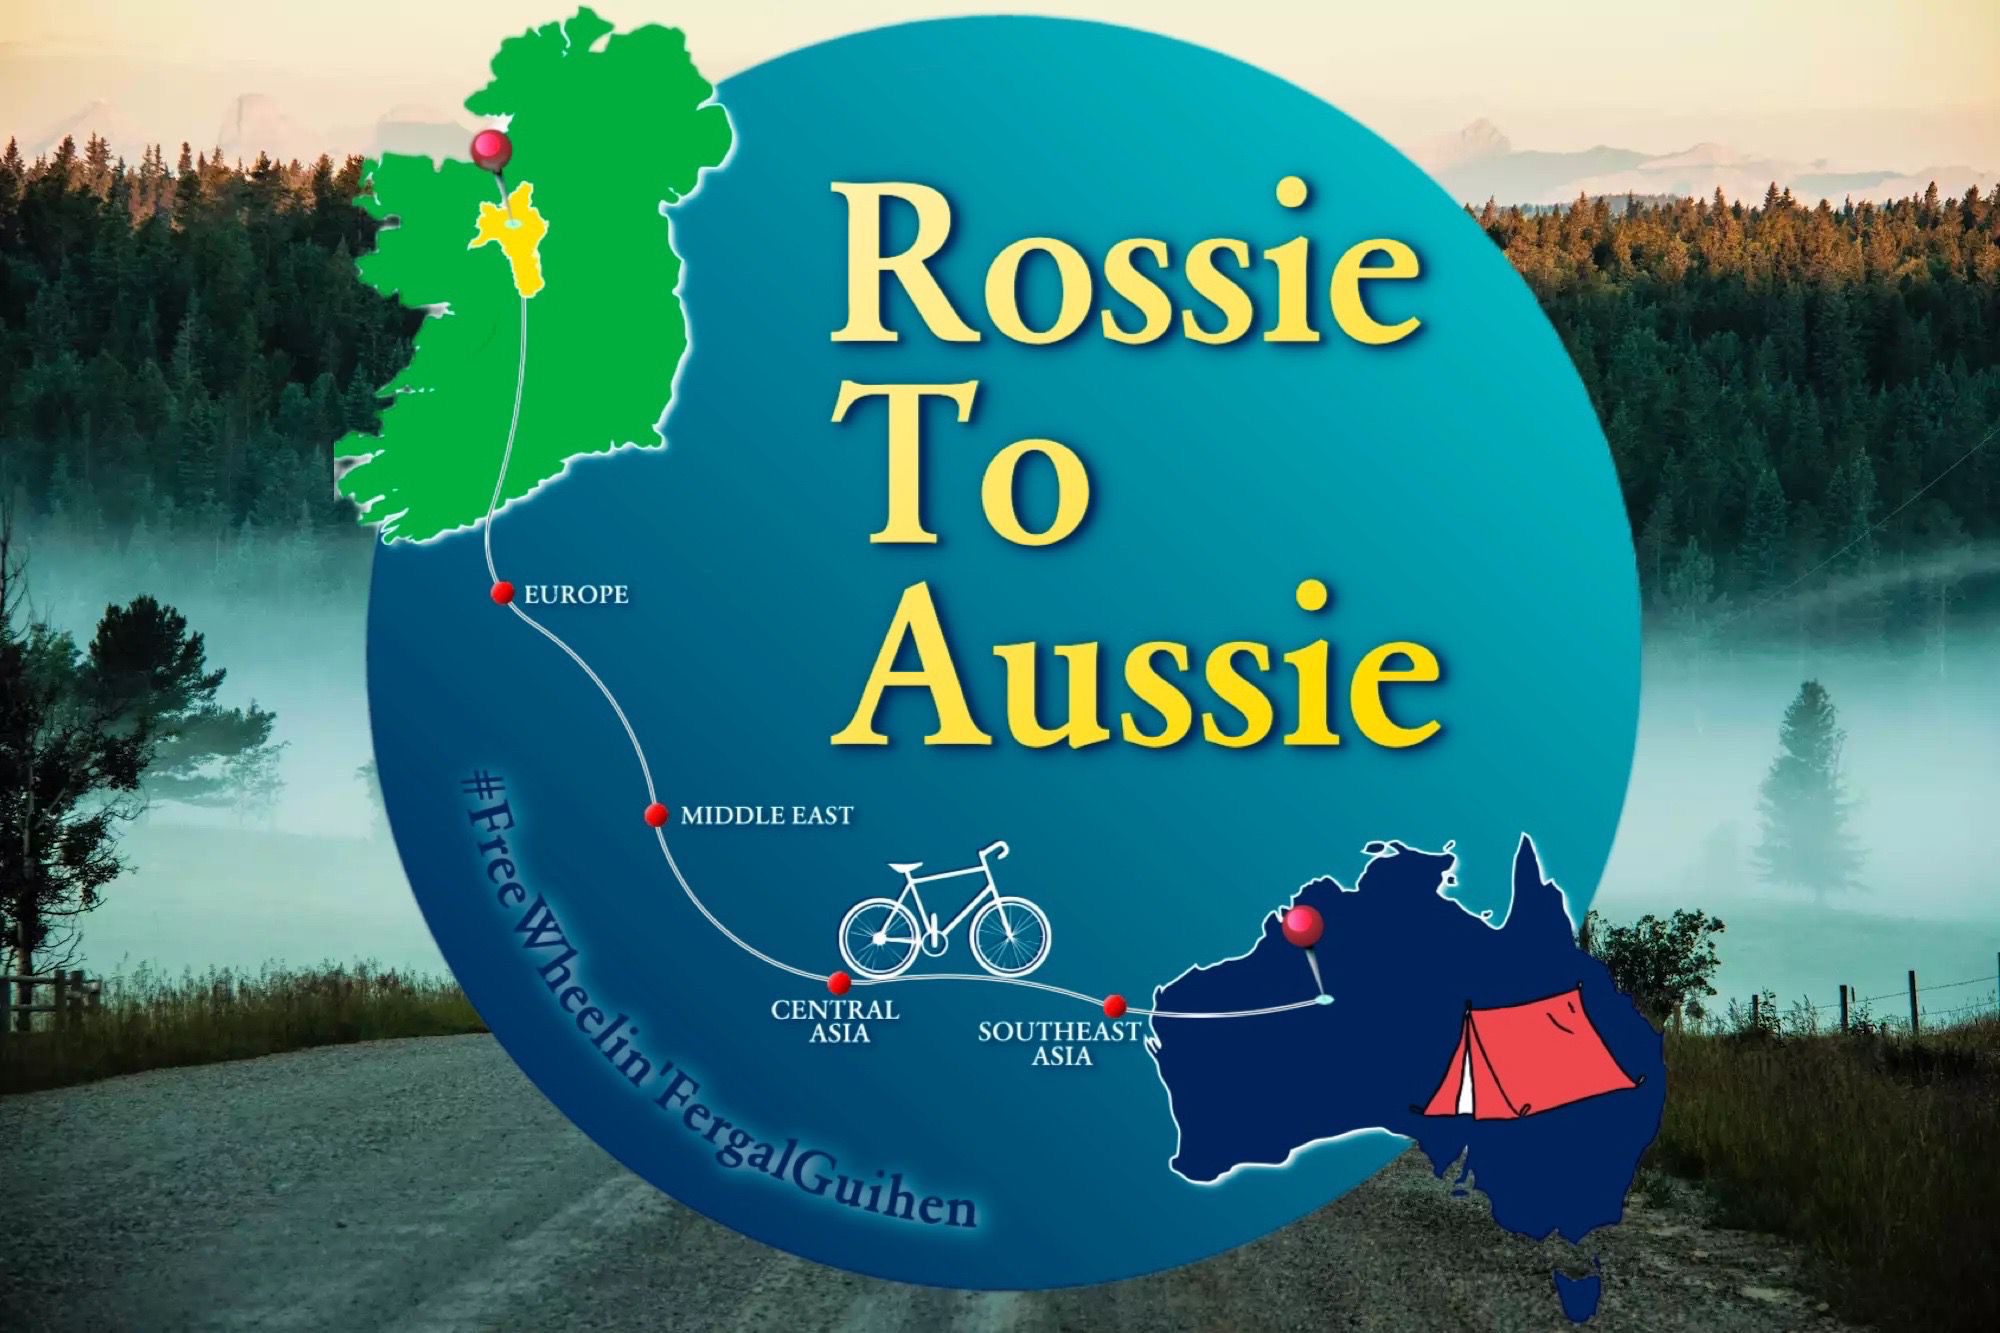 NURSE SET FOR ‘ROSSIE TO AUSSIE’ CYCLE IN AID OF HOSPICE